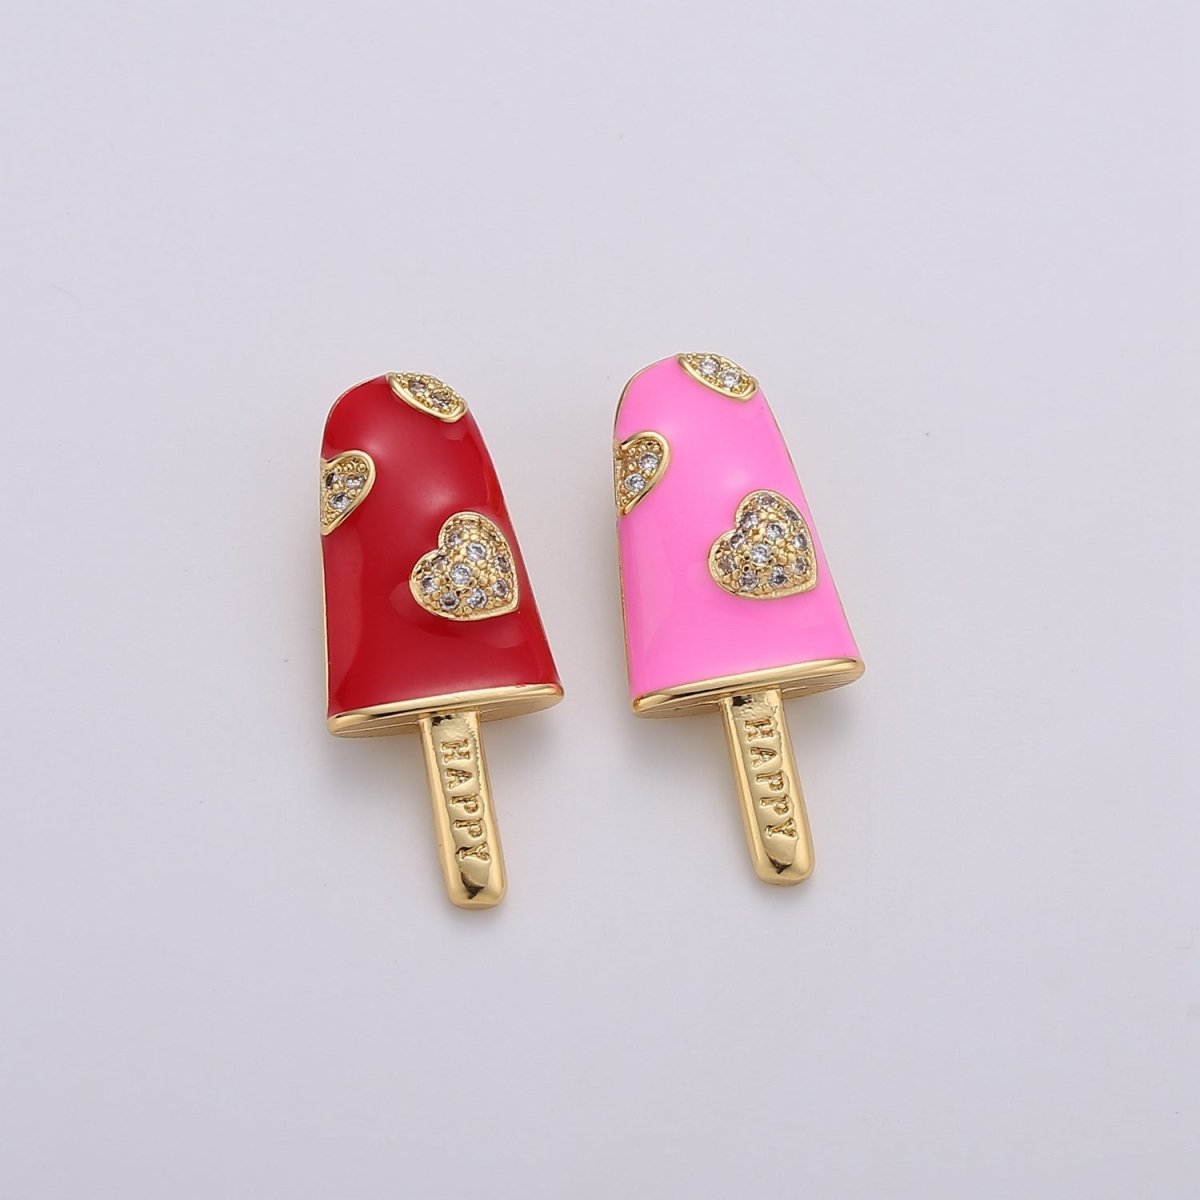 Pink Enamel Charm, Red Lollipop Charms, Sweet Charms, Happy Jewelry Pendant, Necklace Bracelet Charm, Craft Supplies, Gold Plated I-745 I-746 - DLUXCA